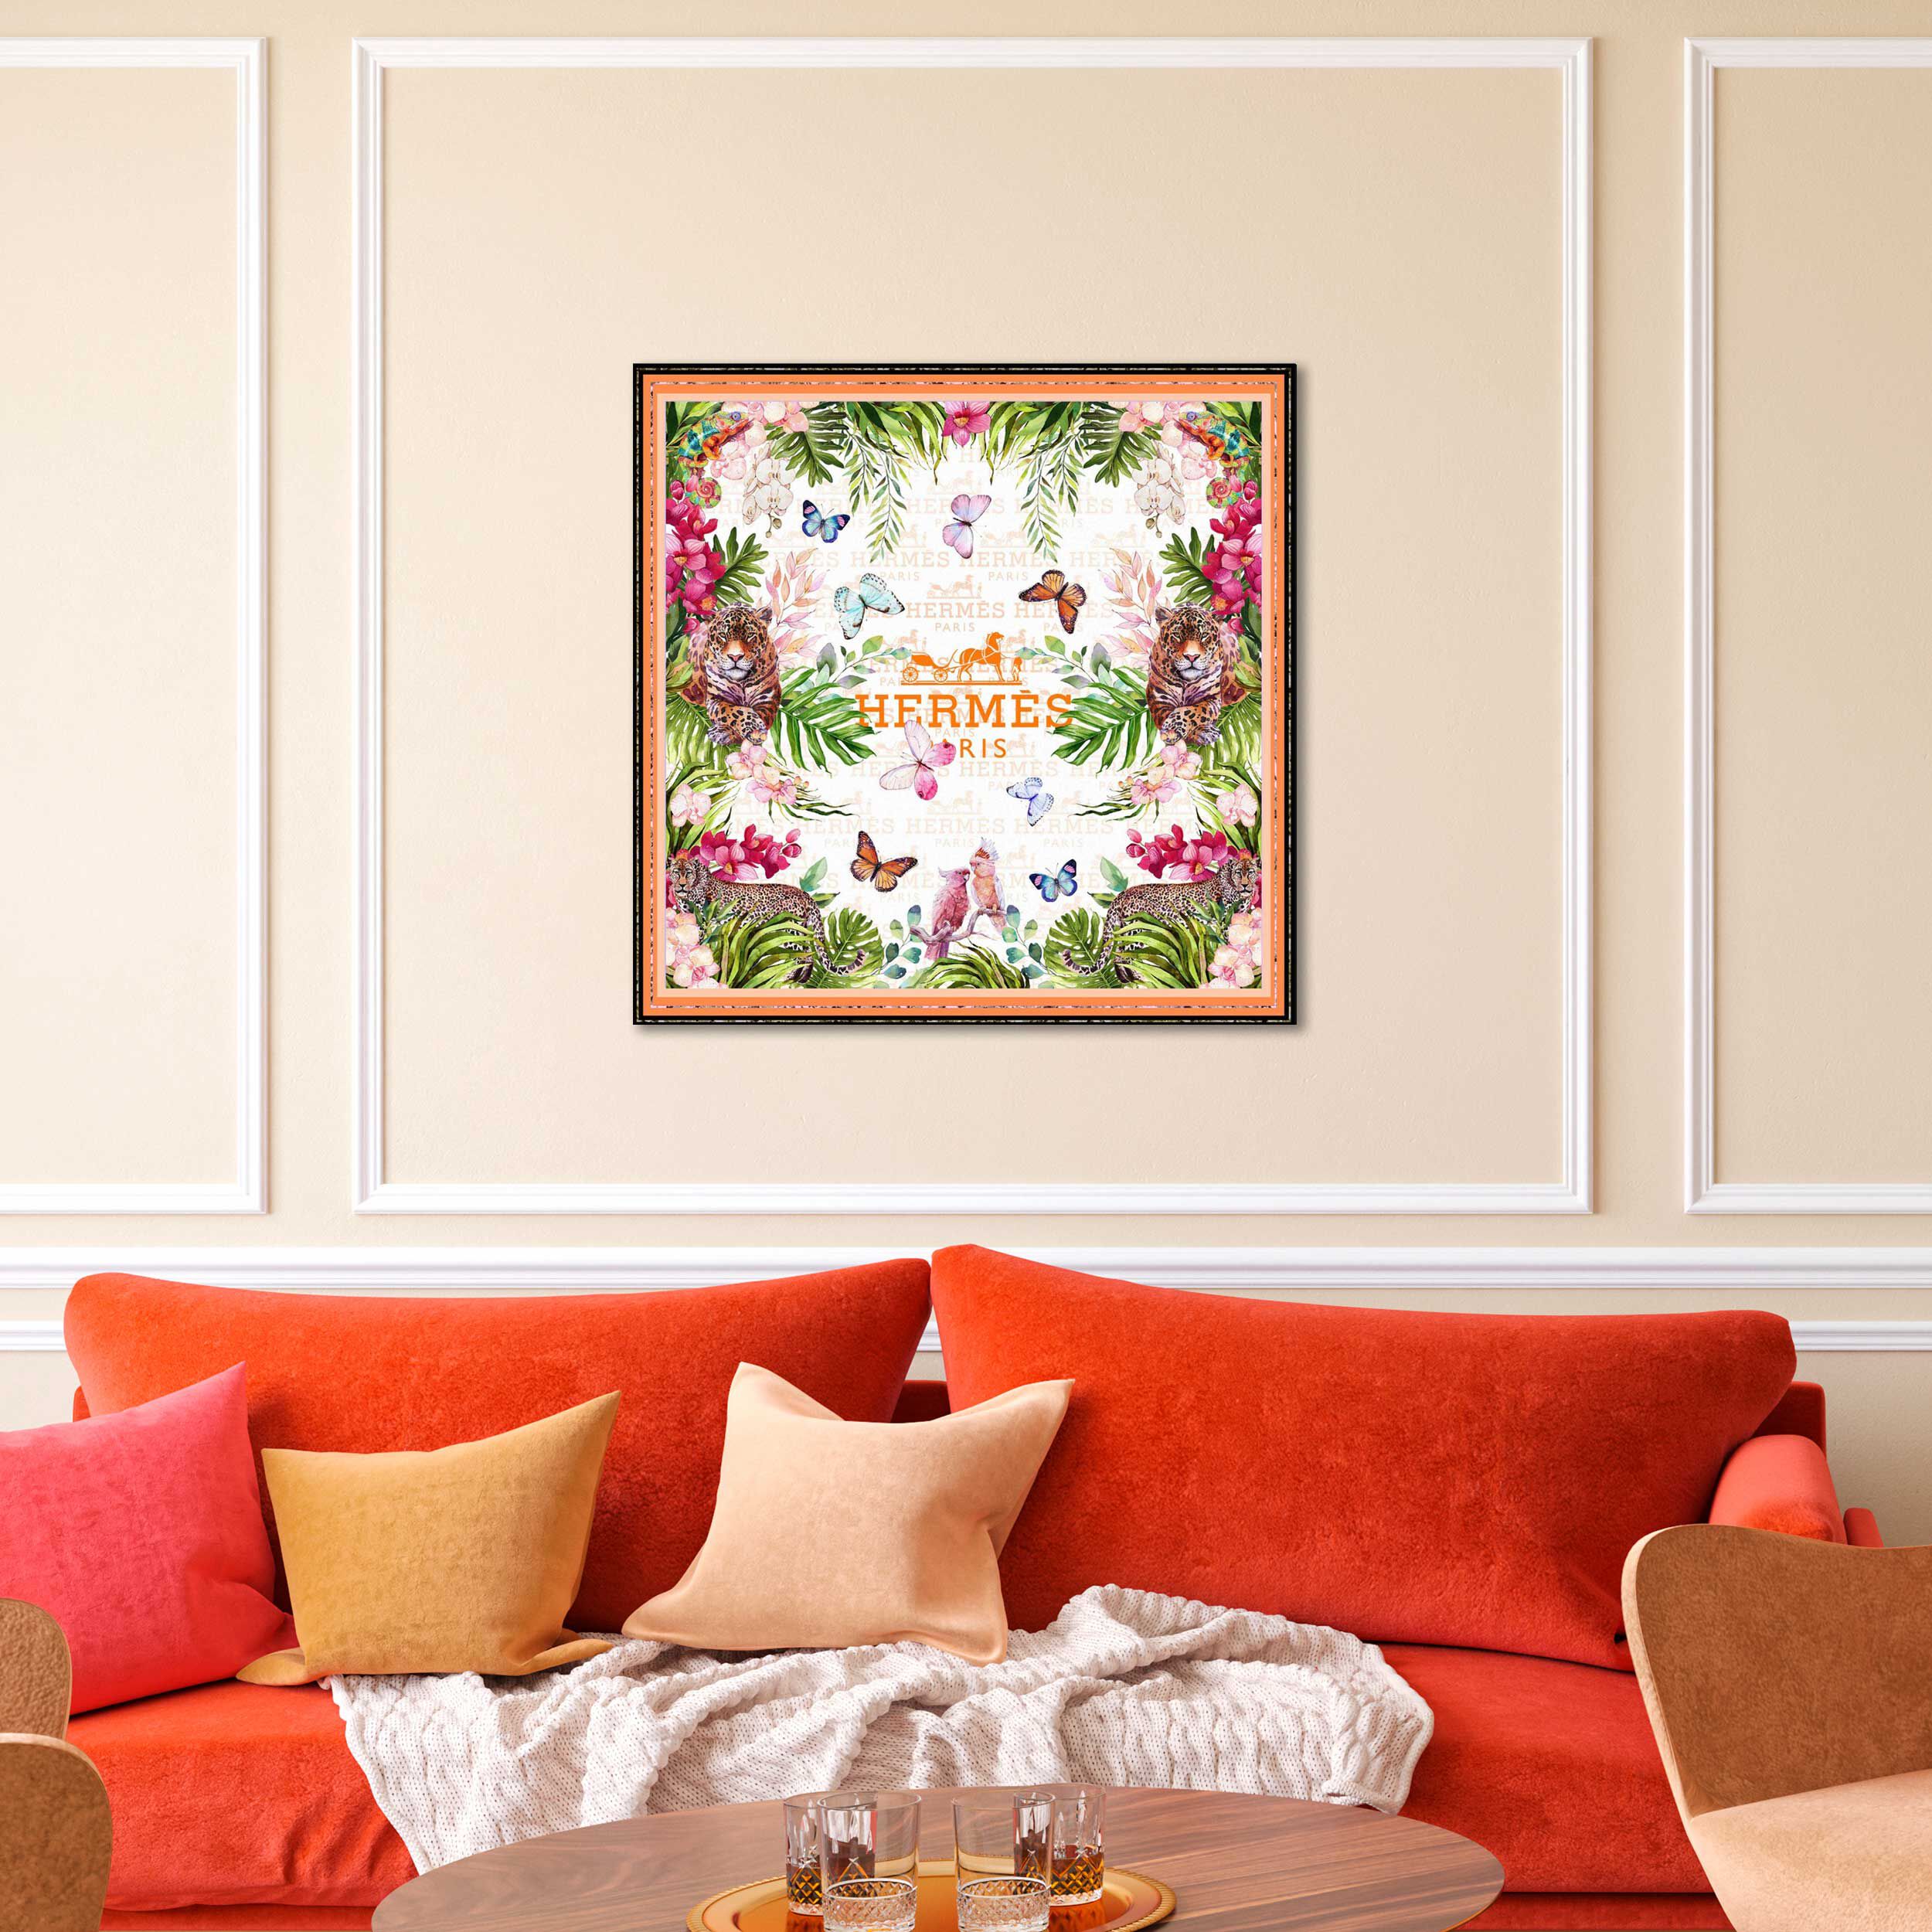 Bestselling Trendy Wall Art for Every Room | Oliver Gal